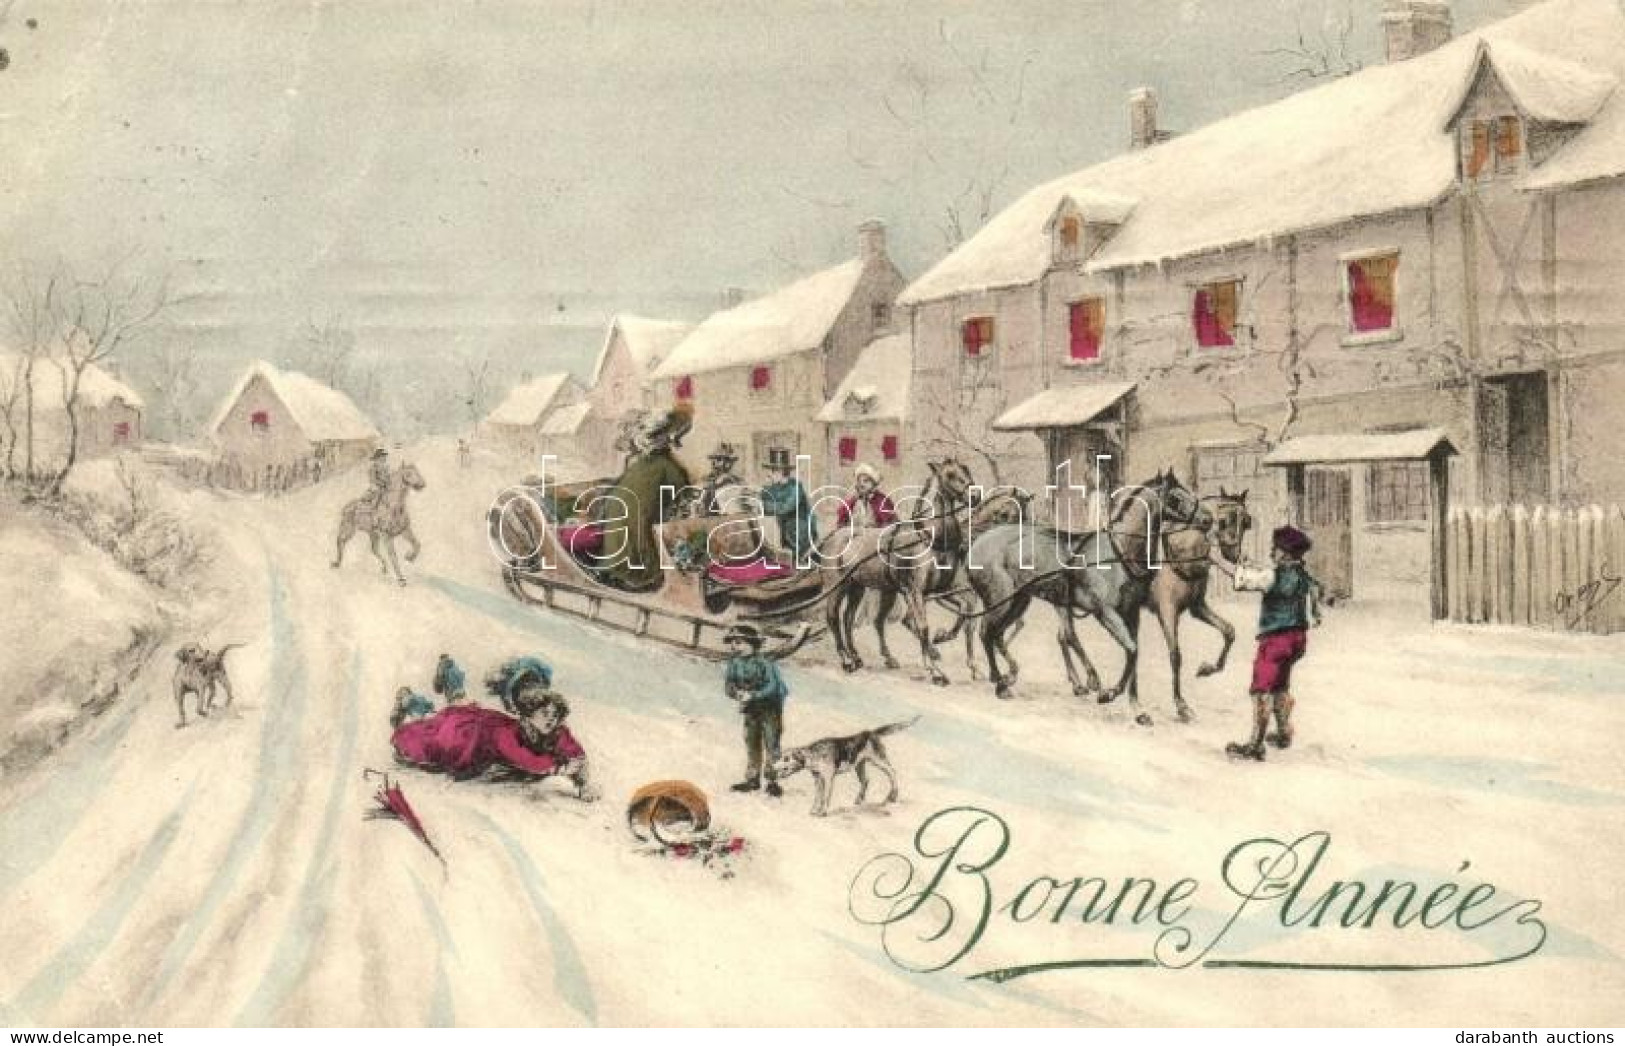 T3 'Bonne Année' / New Year, Horse Sled, Woman Fallen In The Snow, Collection Réve No. 026 (EB) - Ohne Zuordnung